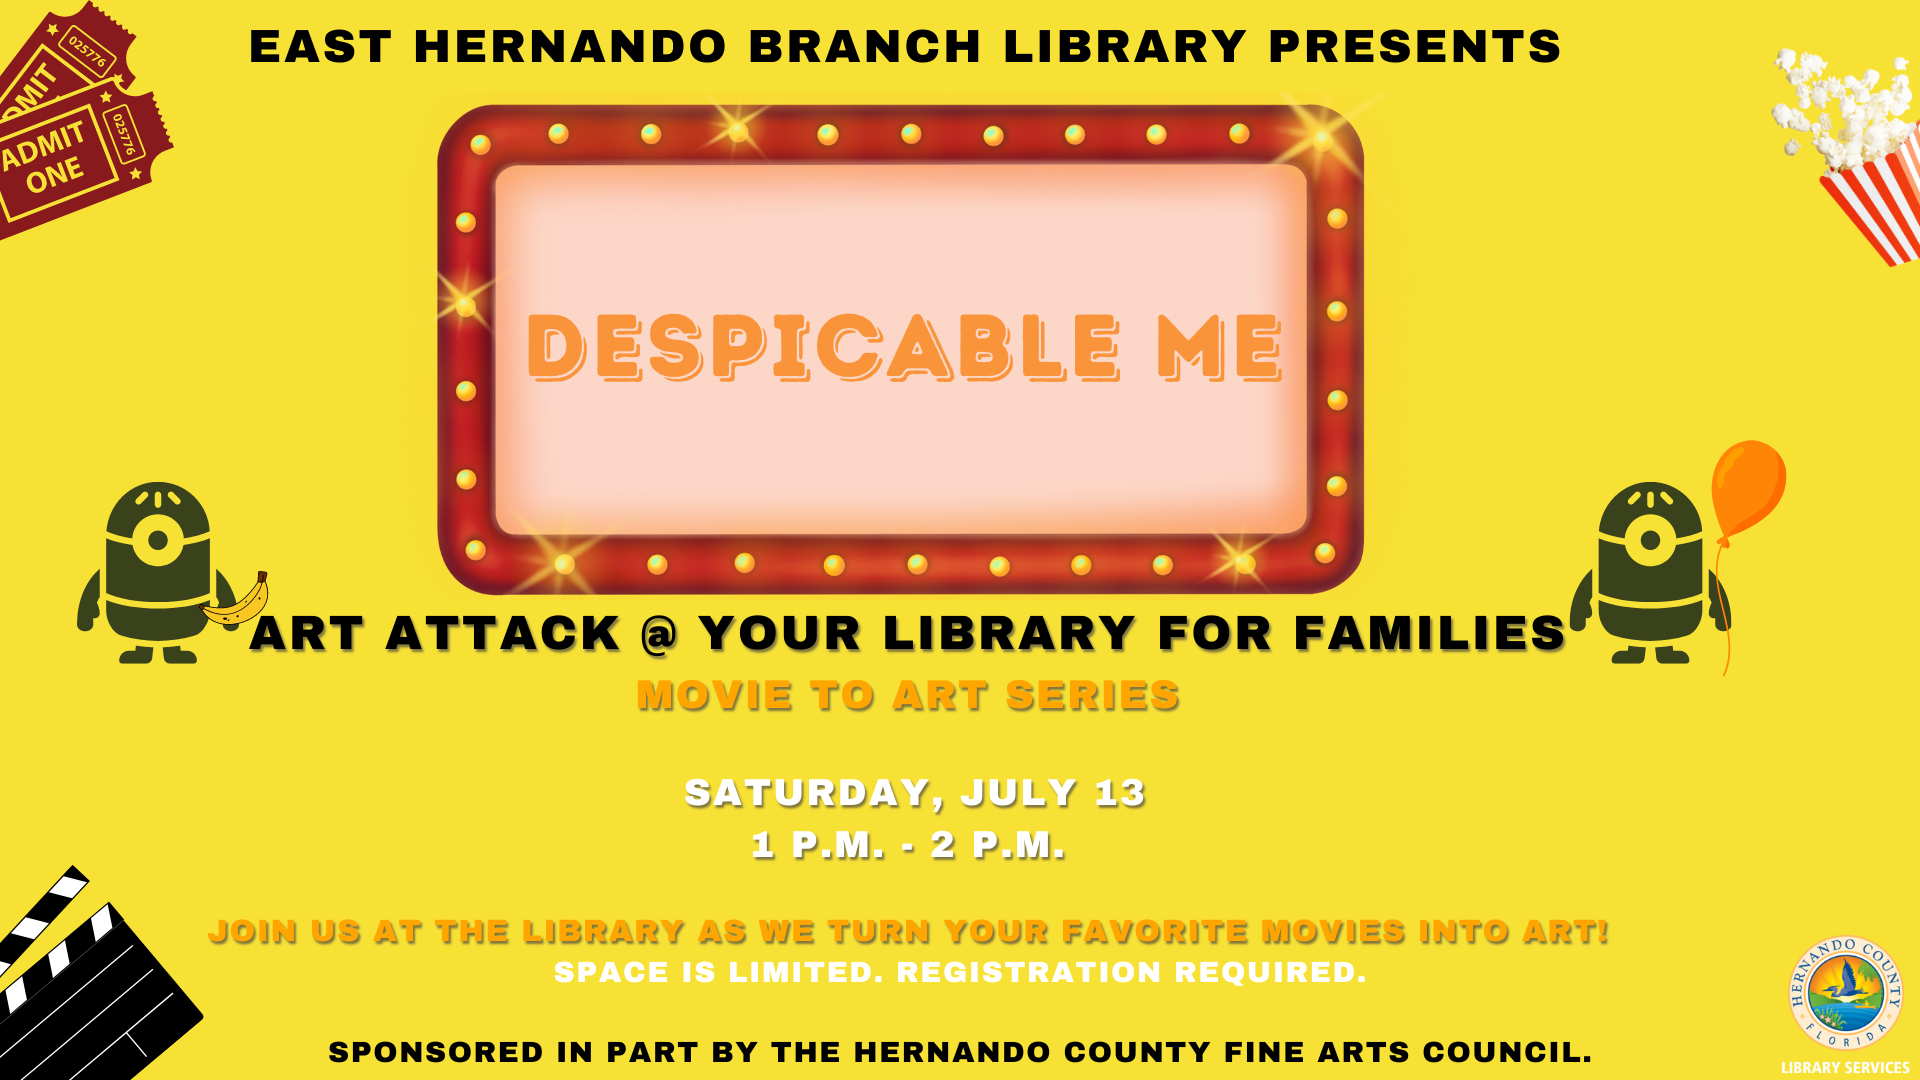 Art Attack @ Your Library for Families